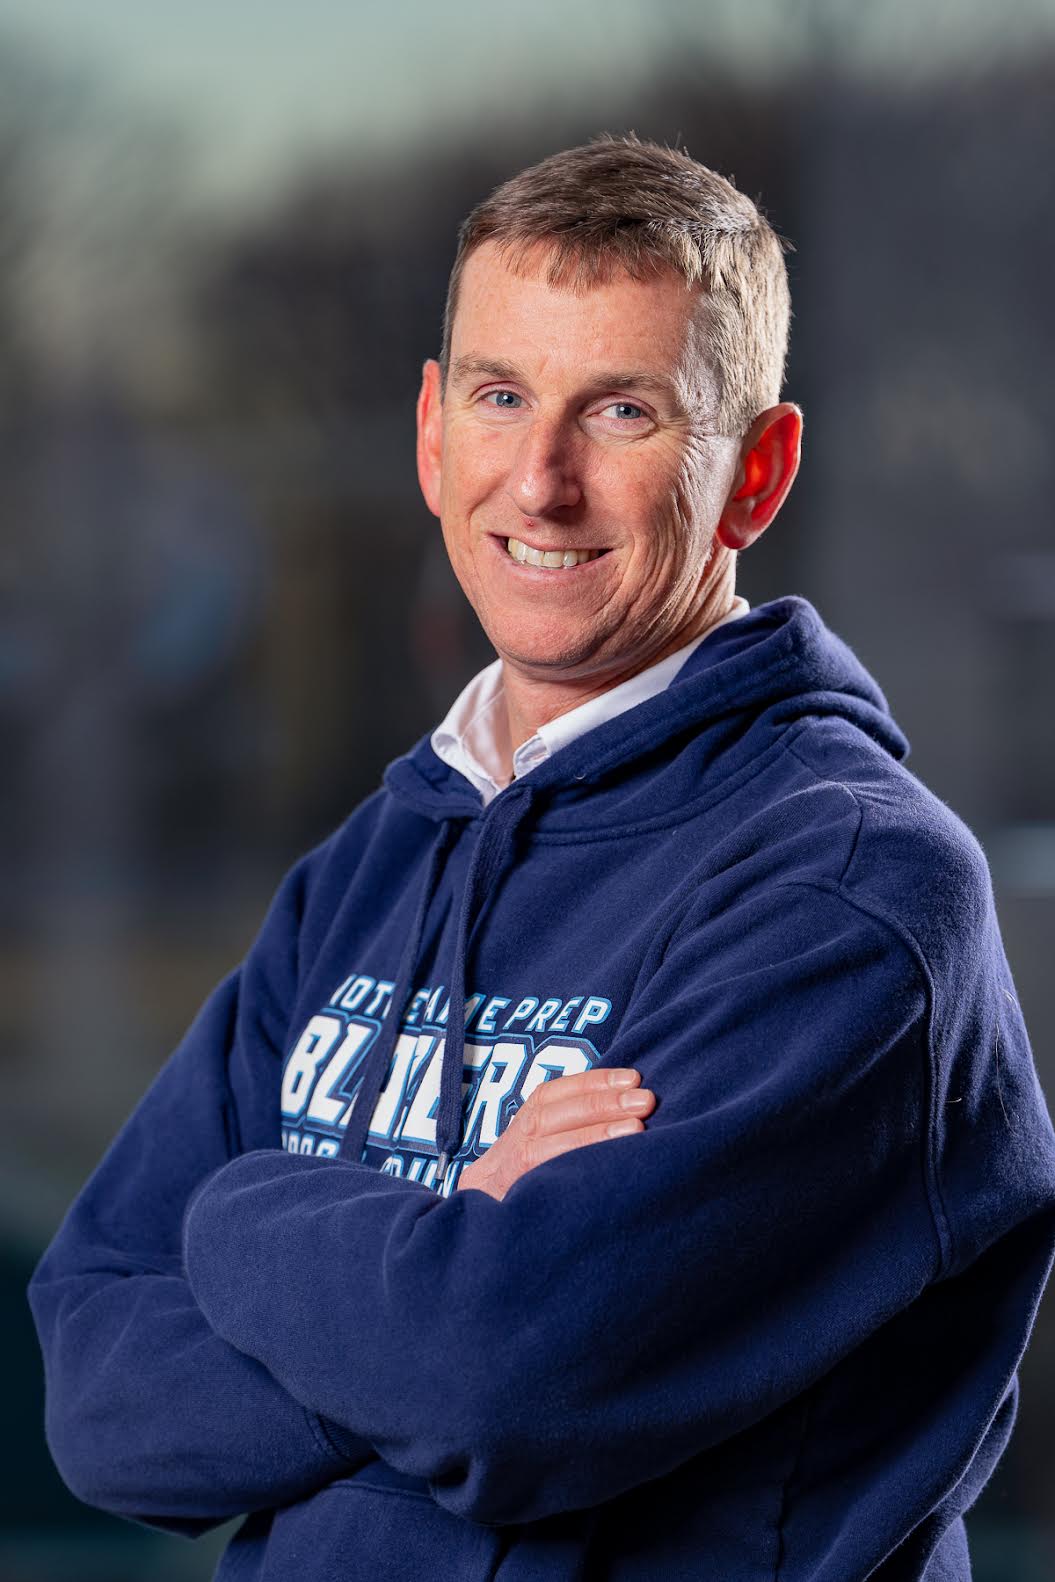 Jim Lancaster ‘humbled and flattered’ by being selected the IAAM Indoor Track Coach of the Year